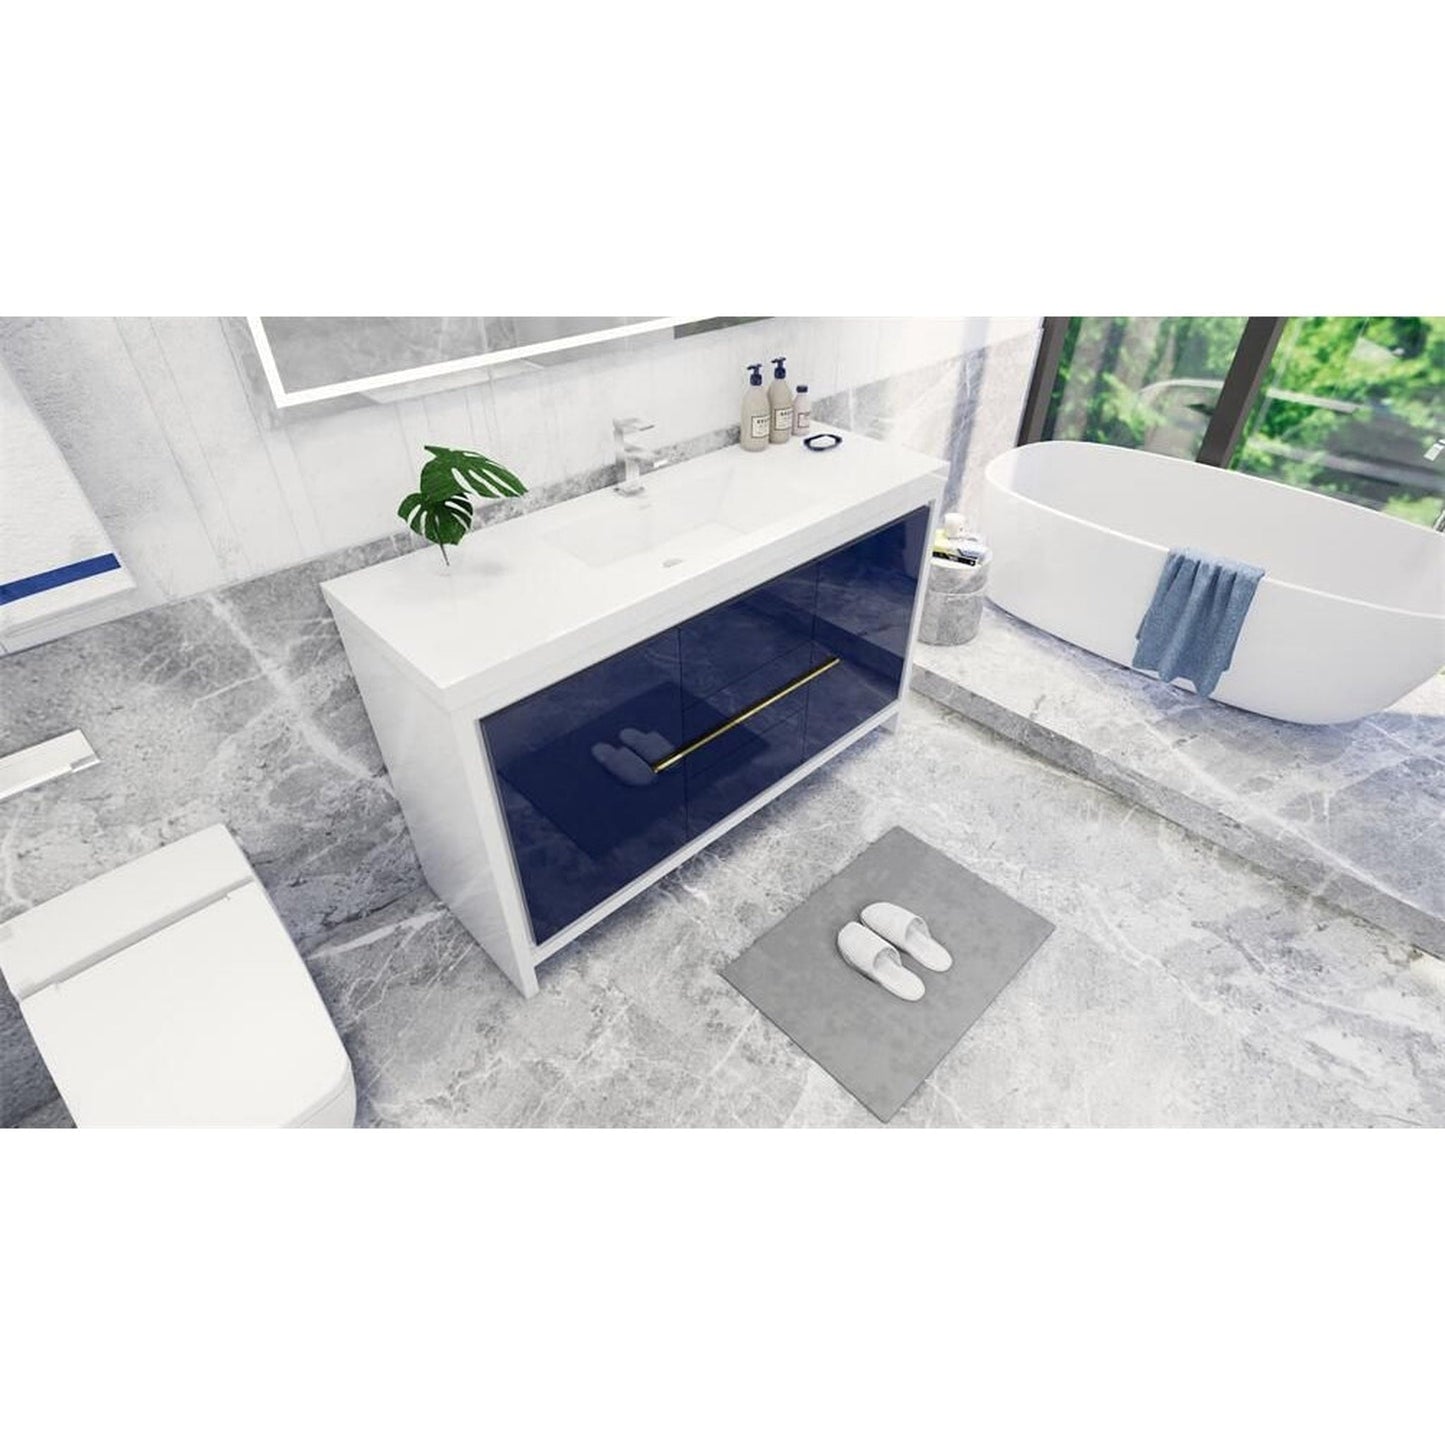 Moreno Bath Dolce 60" High Gloss Night Blue Freestanding Vanity With Single Reinforced White Acrylic Sink